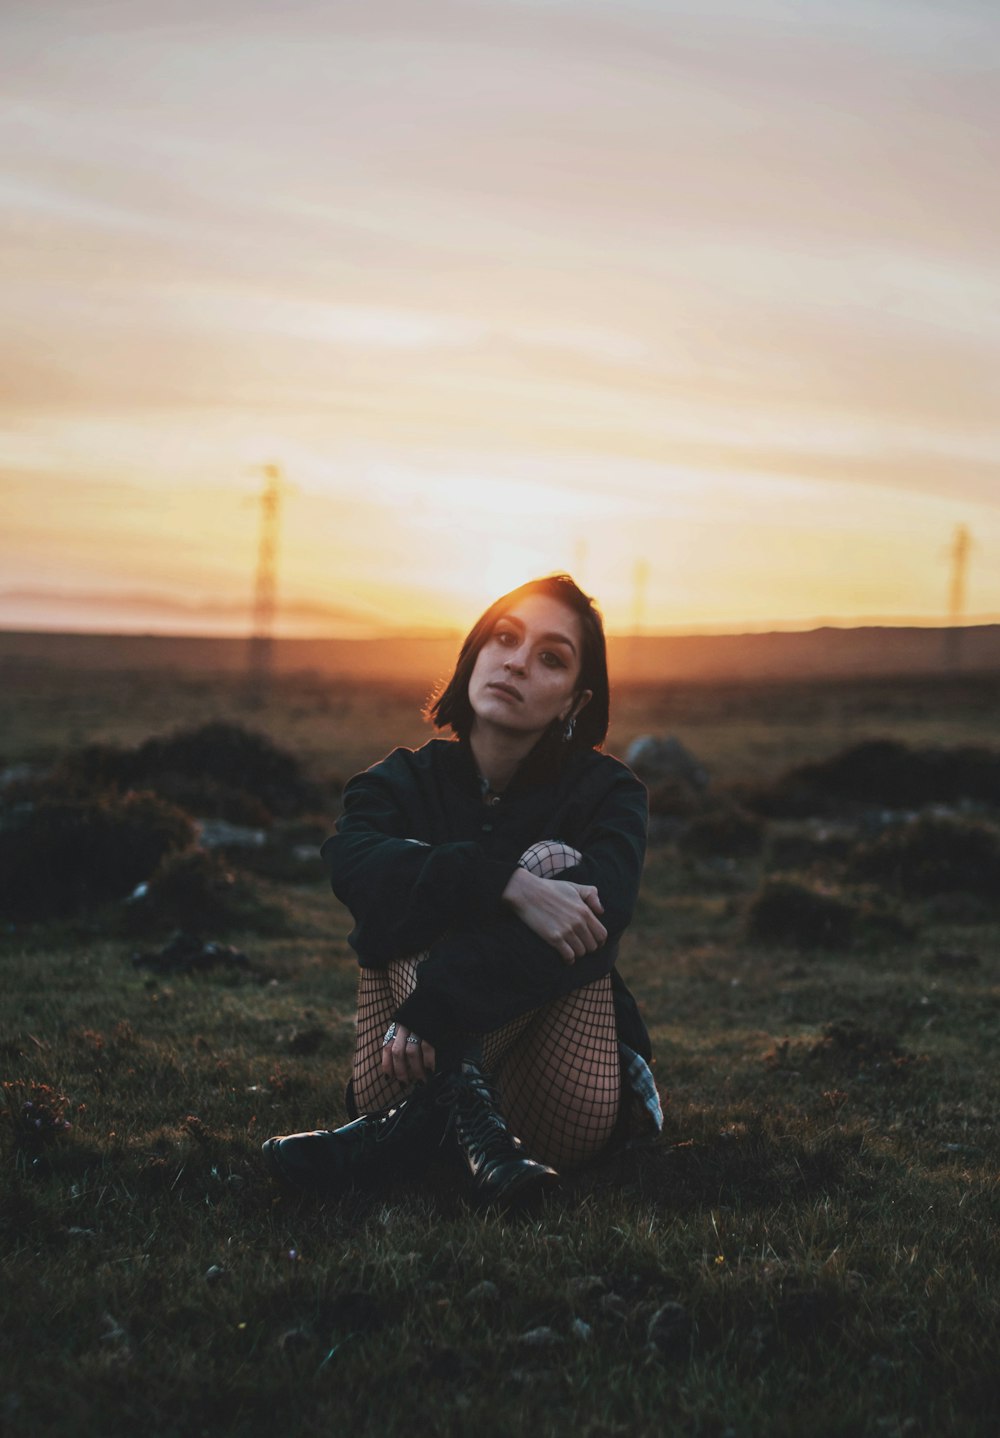 woman in black jacket sitting on grass field during sunset